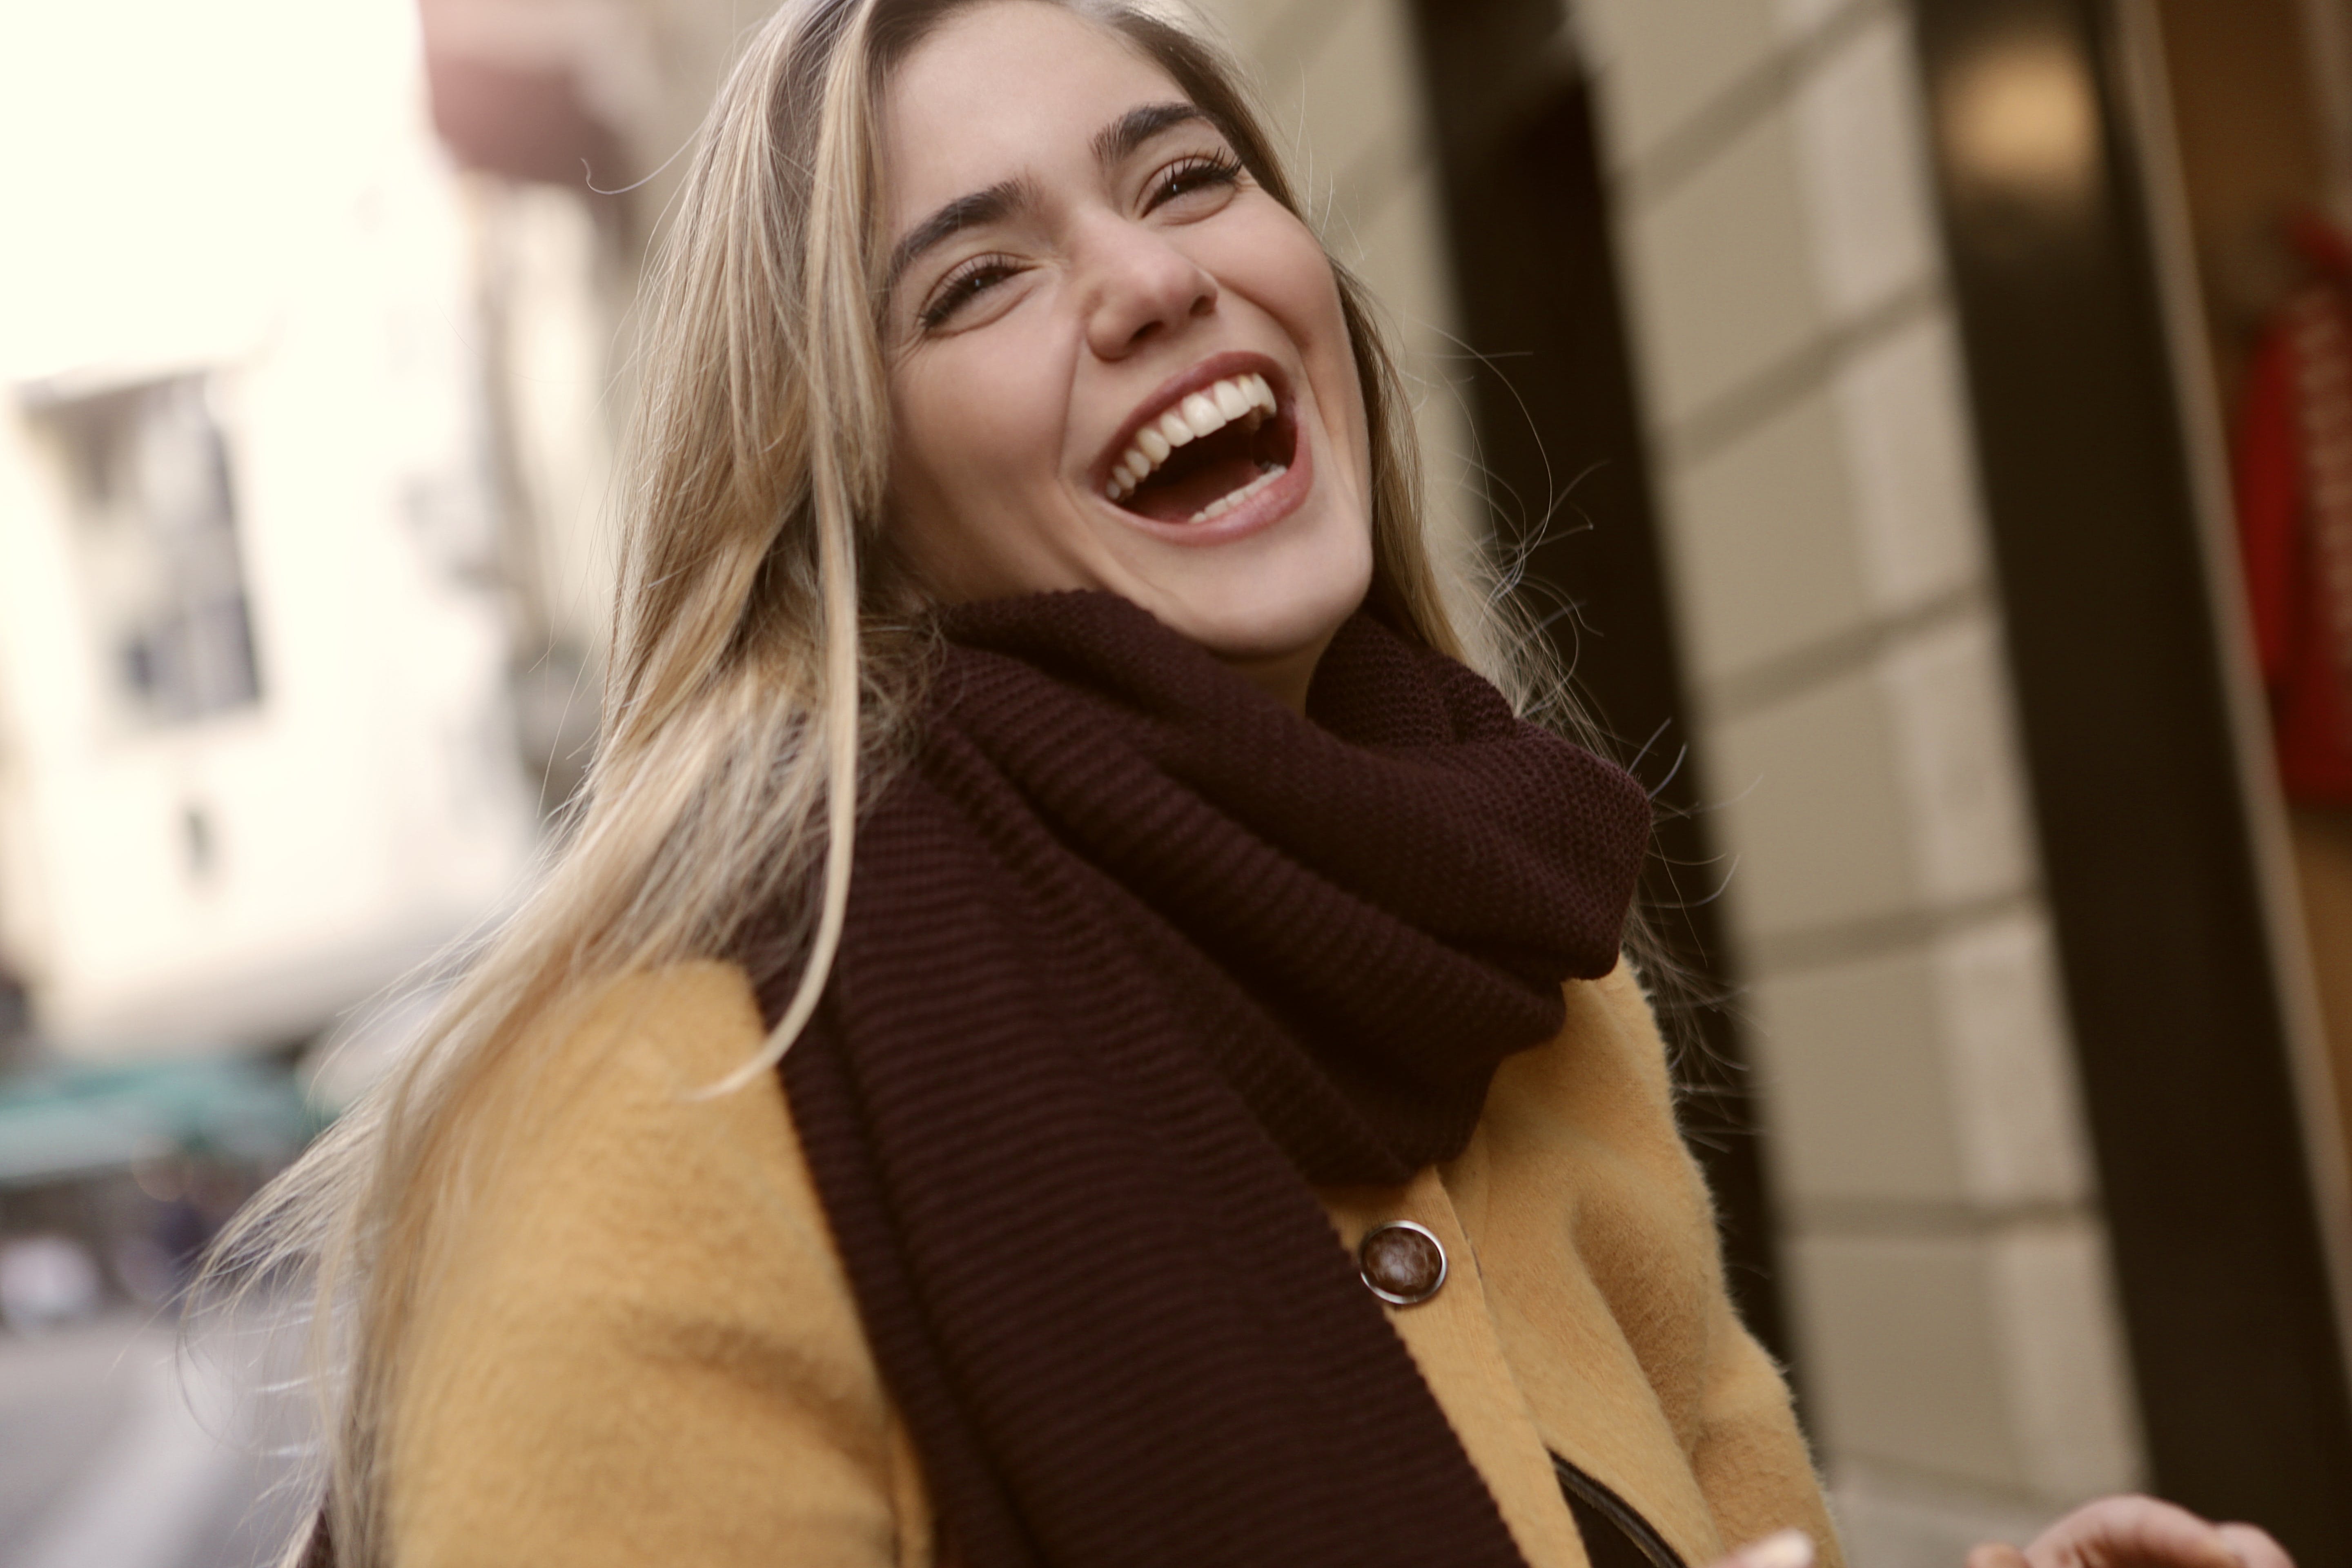 Did You Know Laughter Can Have a Positive Impact on Your Smile?